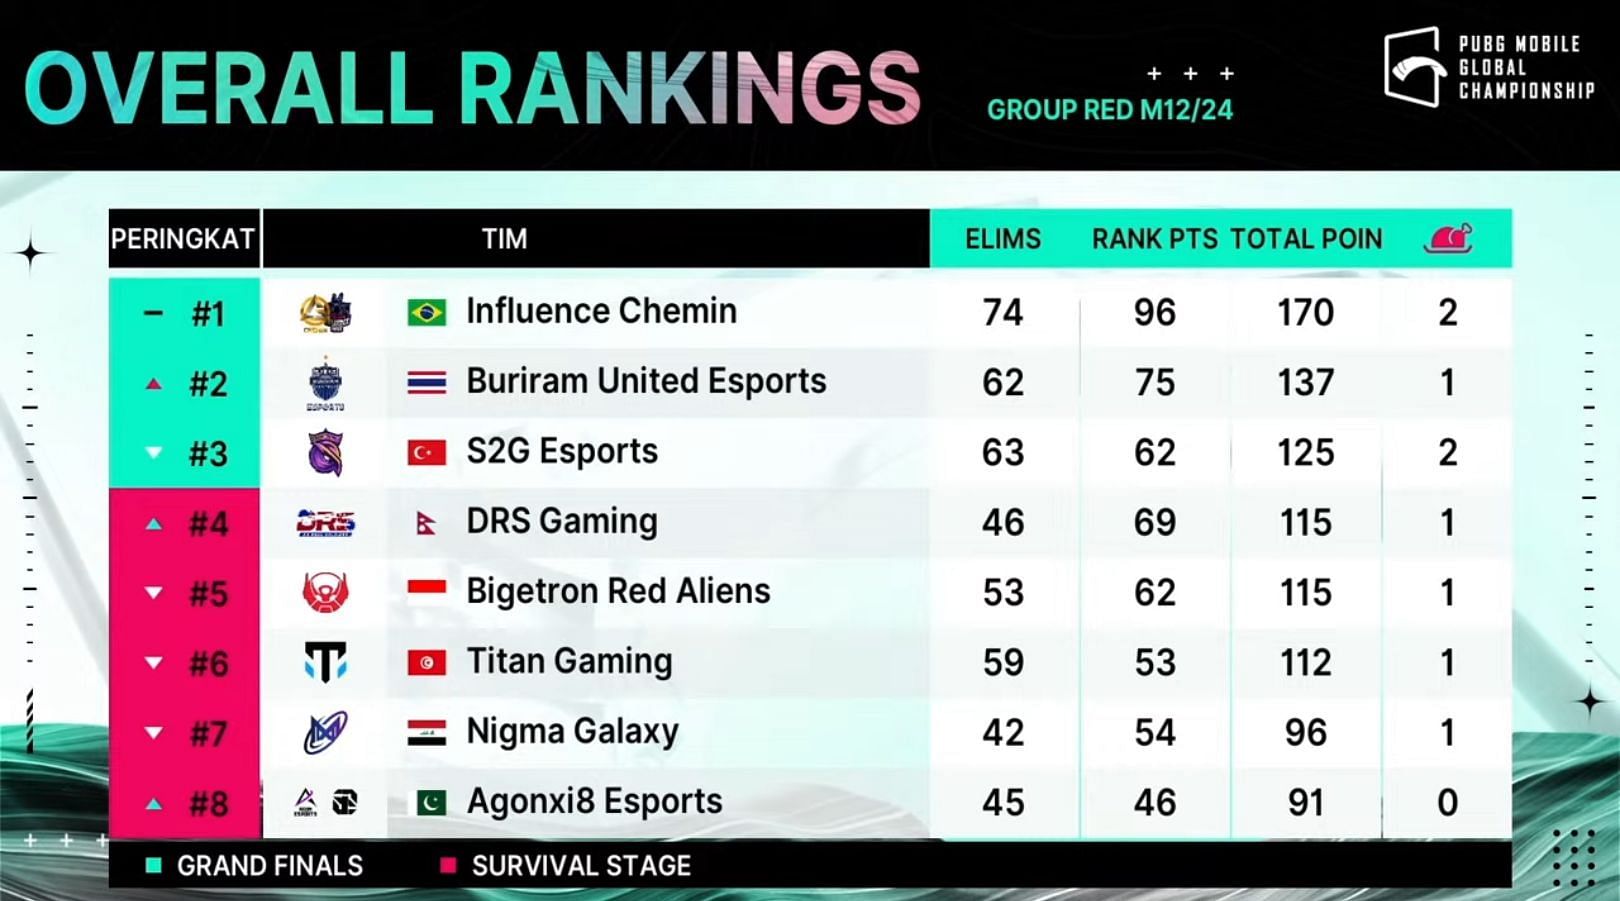 PMGC Group Red standings after 12 matches (Image via PUBG Mobile)